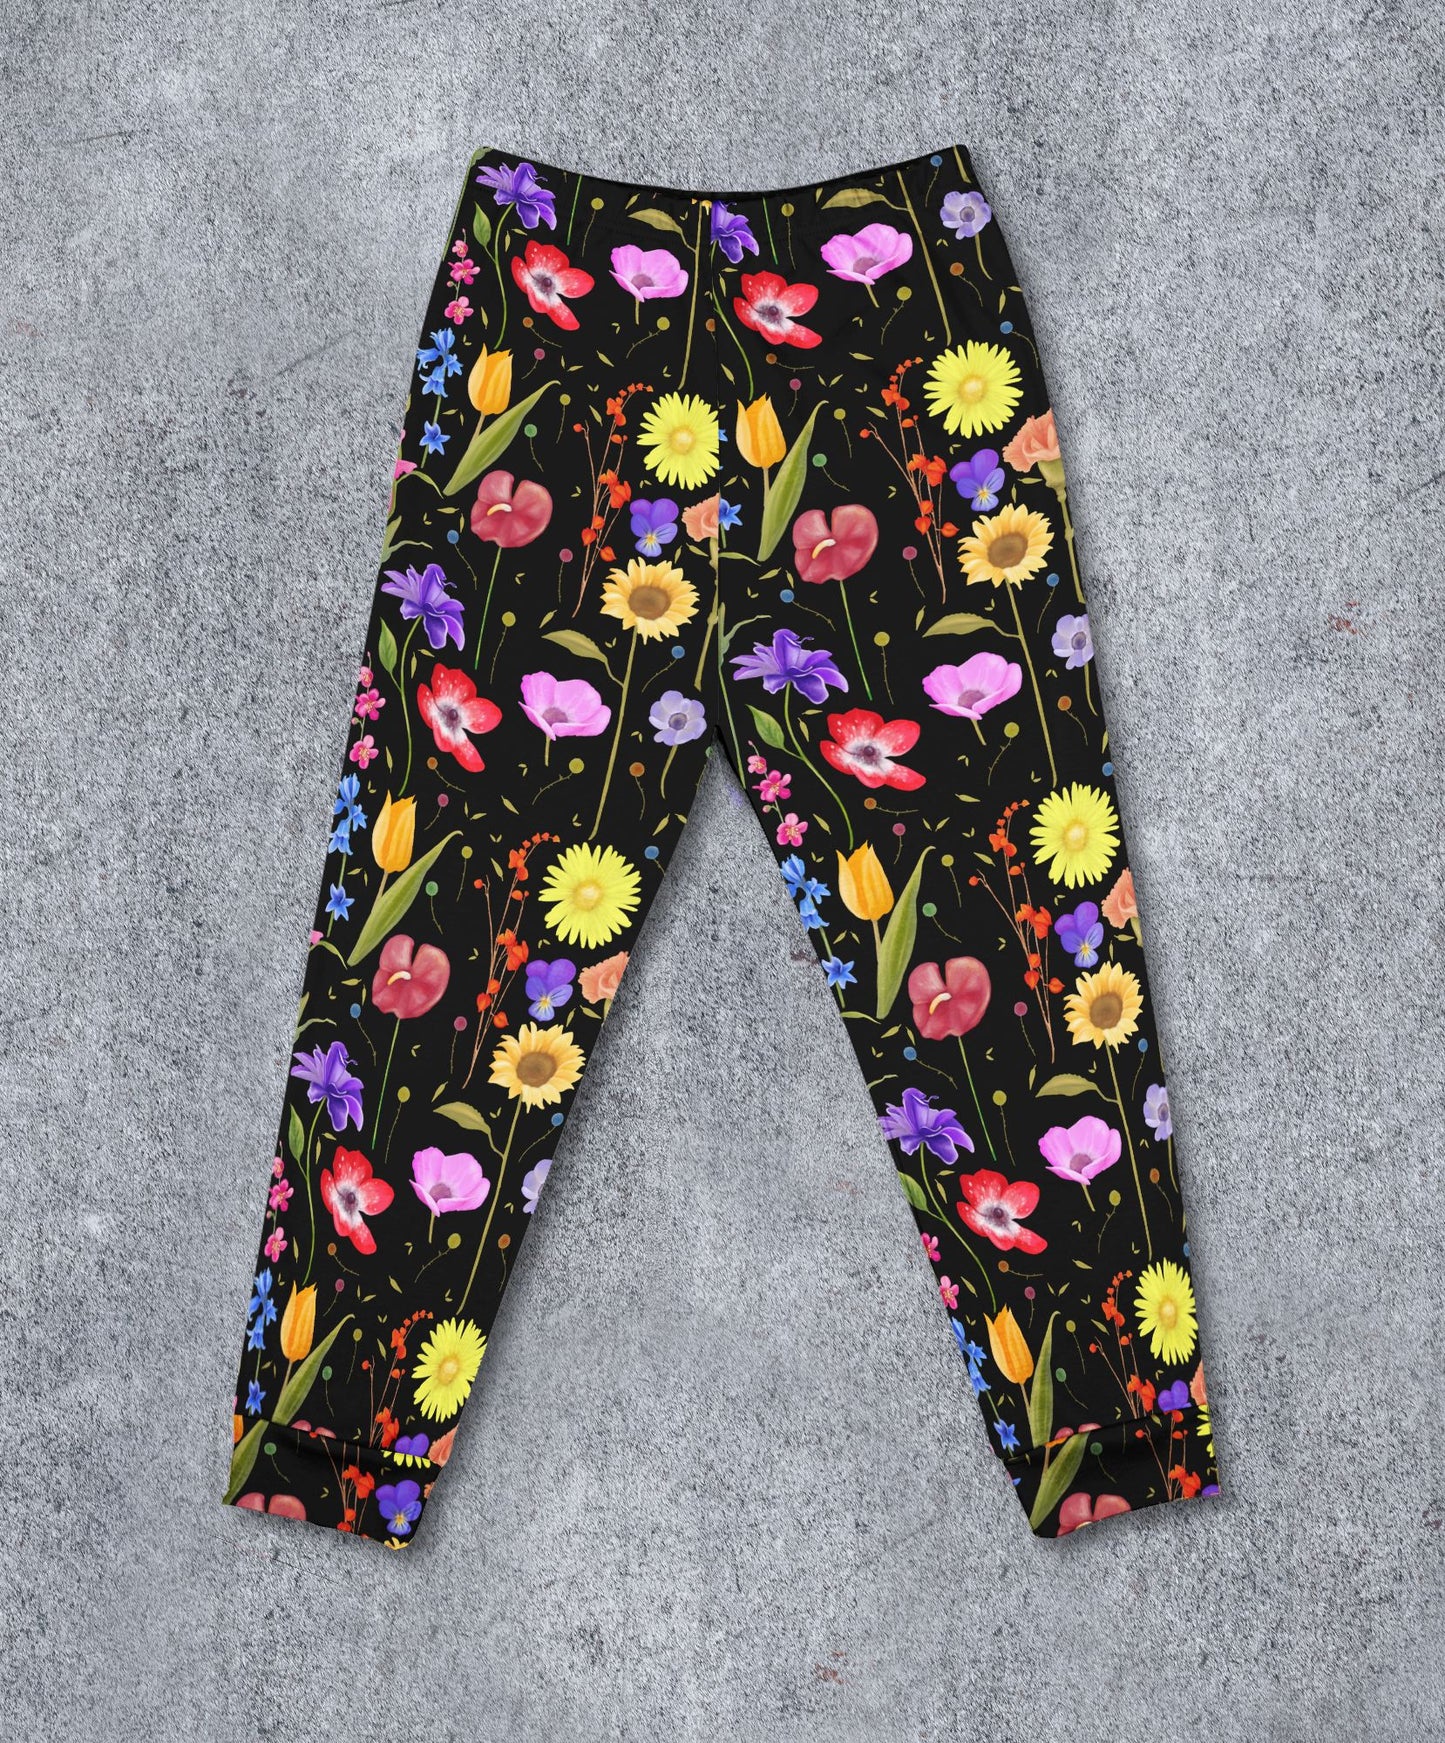 Happy Flowers (without faces) Children's Cotton Jersey Leggings